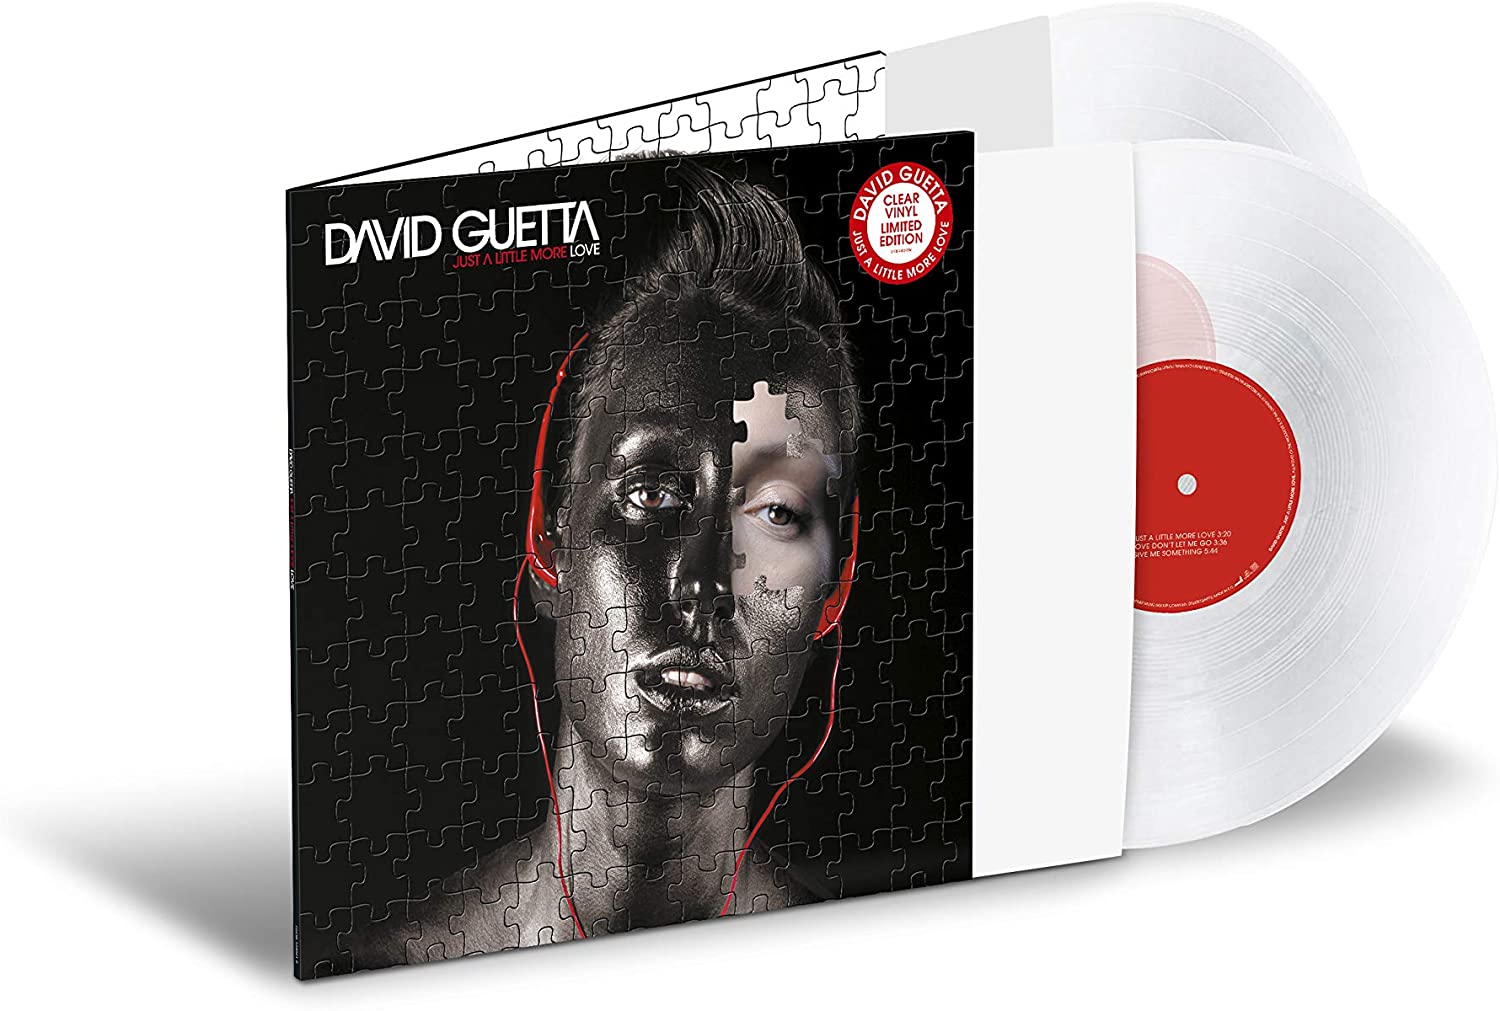 David Guetta – Just A Little More Love (Limited Edition 2LP Clear Vinyl)